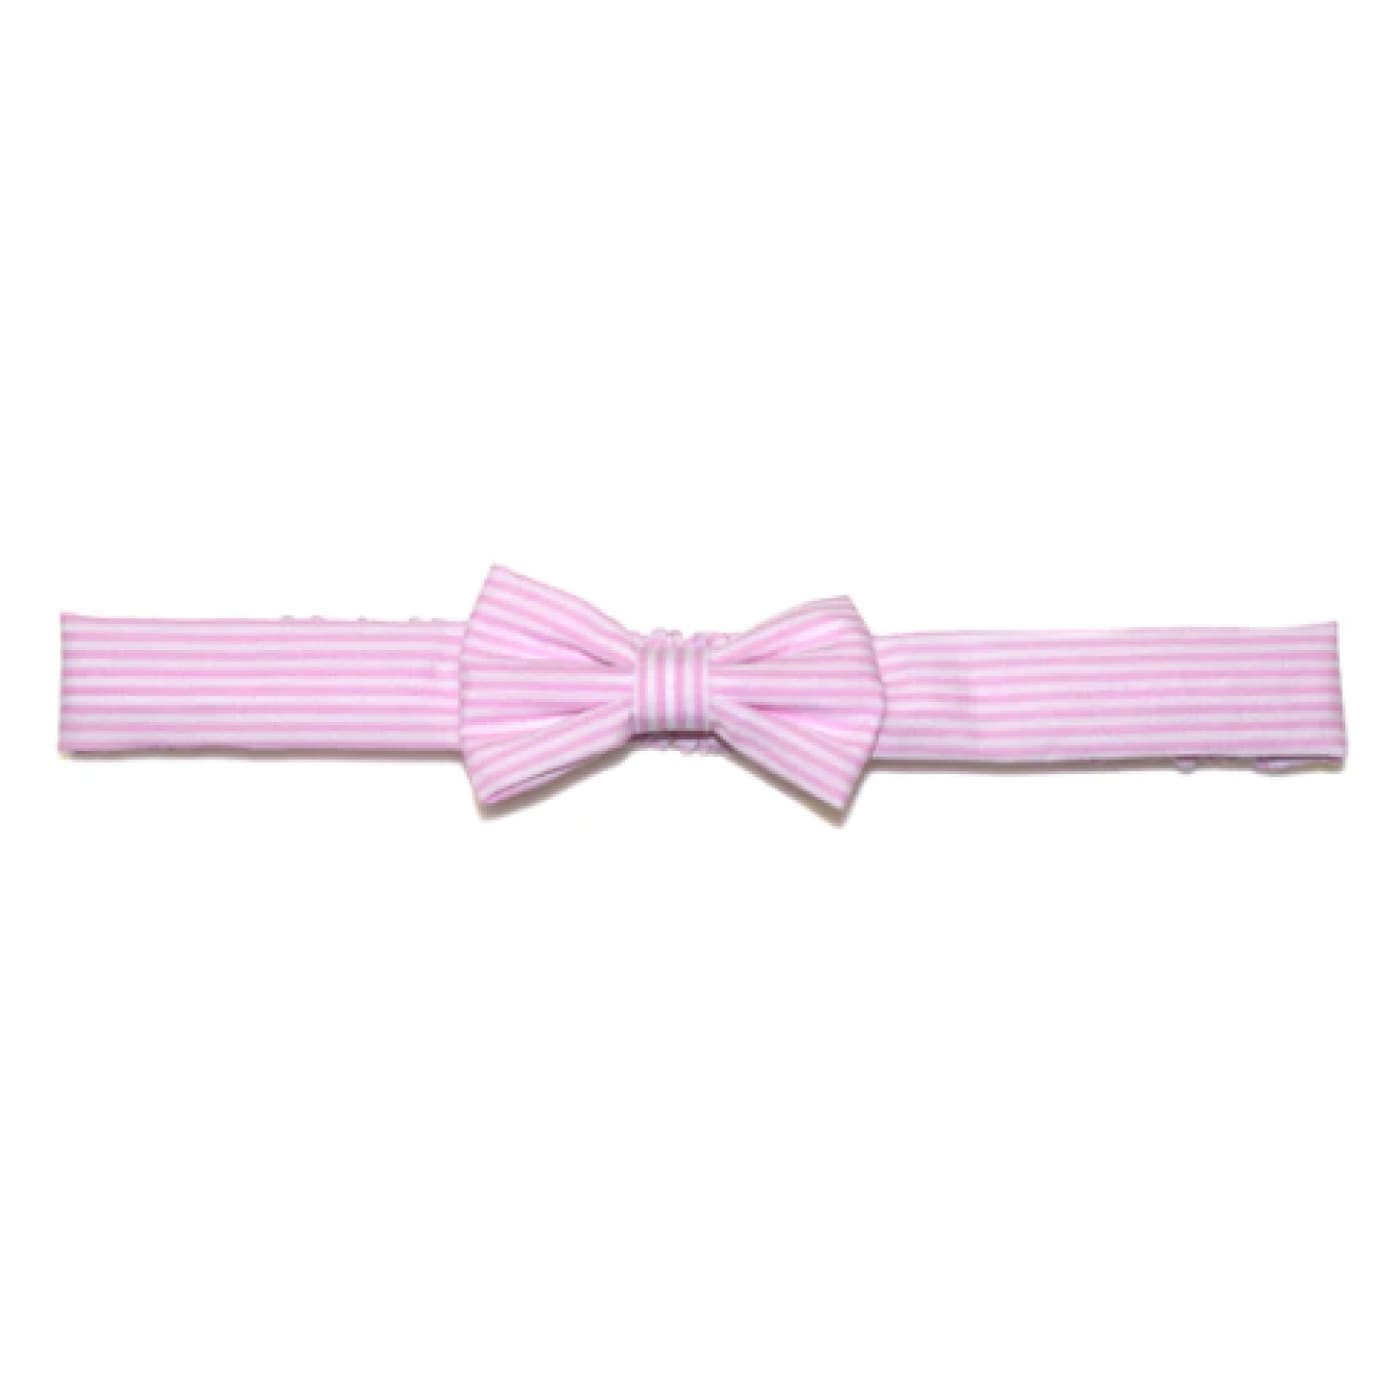 Goody Gumdrops Baby Striped Bow Headband - Pink - Pink - BABY & TODDLER CLOTHING - HEADBANDS/HAIR CLIPS